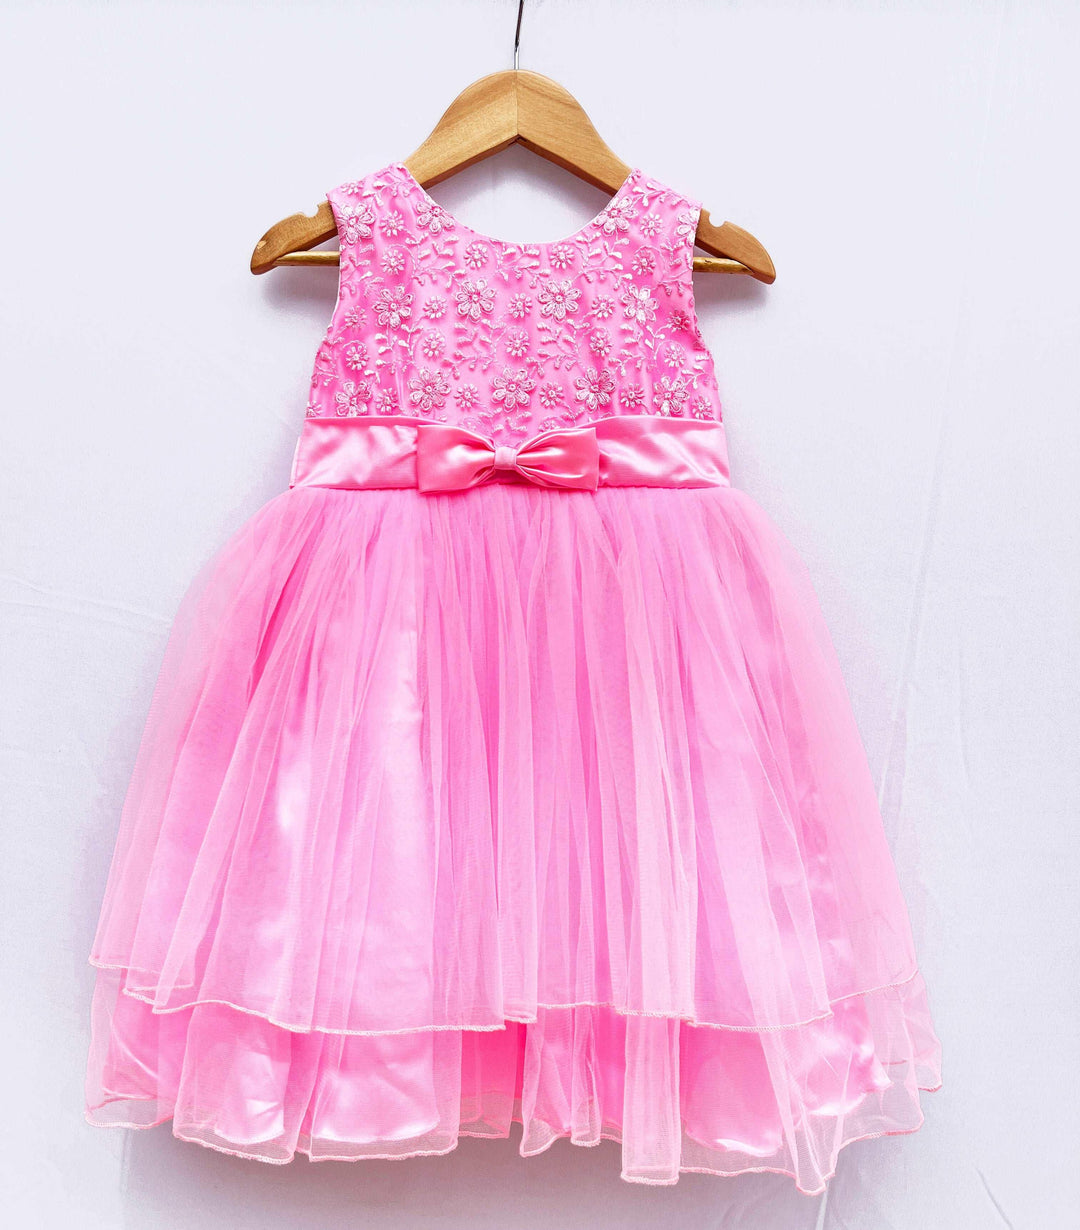 Baby Pink Designer Layered Frock
Fabric: Babypink mono net with premium same colour threadwork detailing on the yoke portion  Beautifully designed outfit for Baby girls with smooth lining for comfo